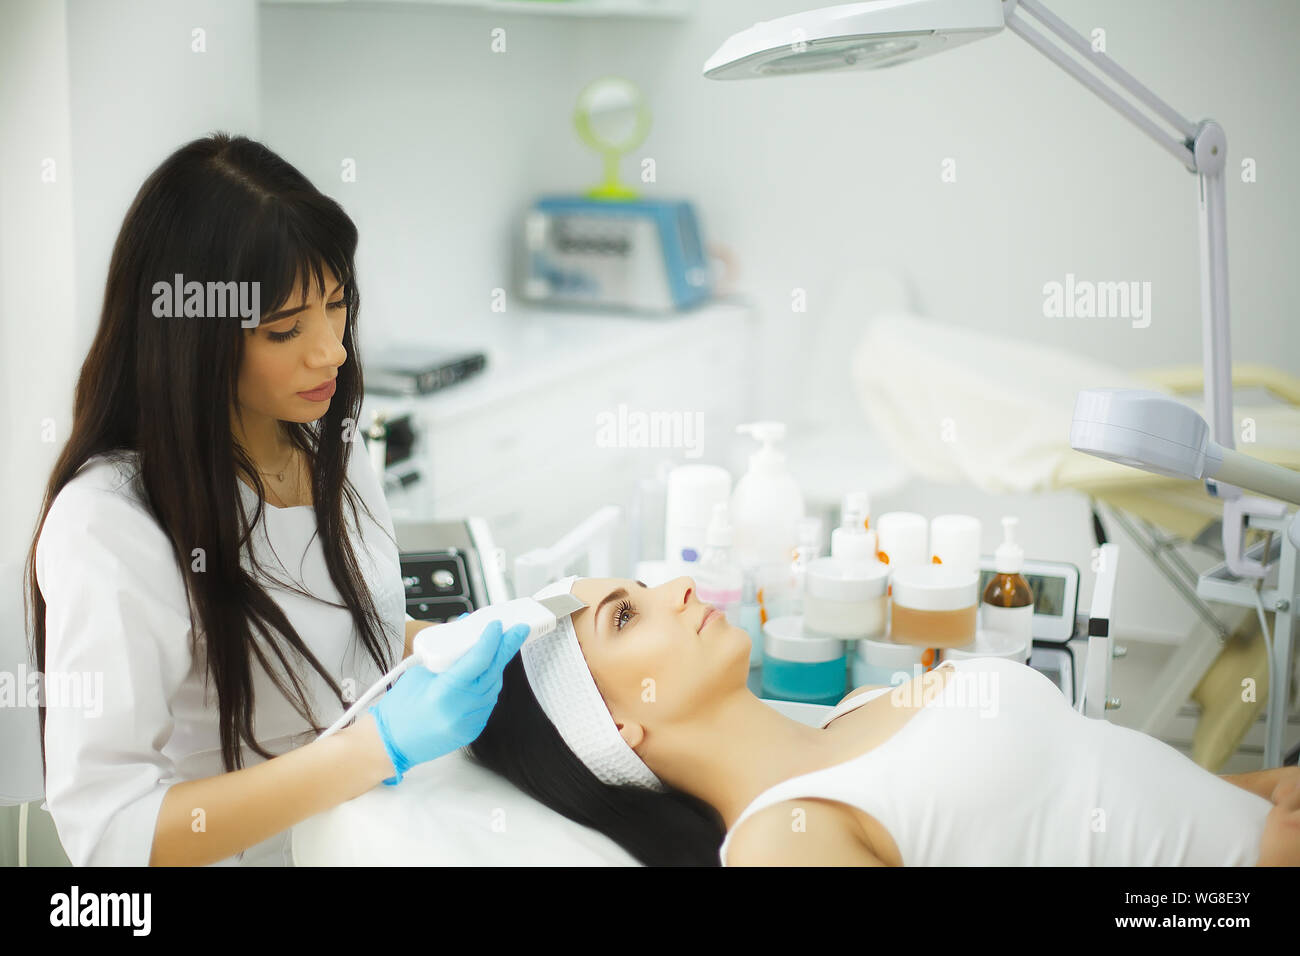 Rejuvenating Facial Treatment Model Getting Lifting Therapy Massage In A Beauty Spa Salon